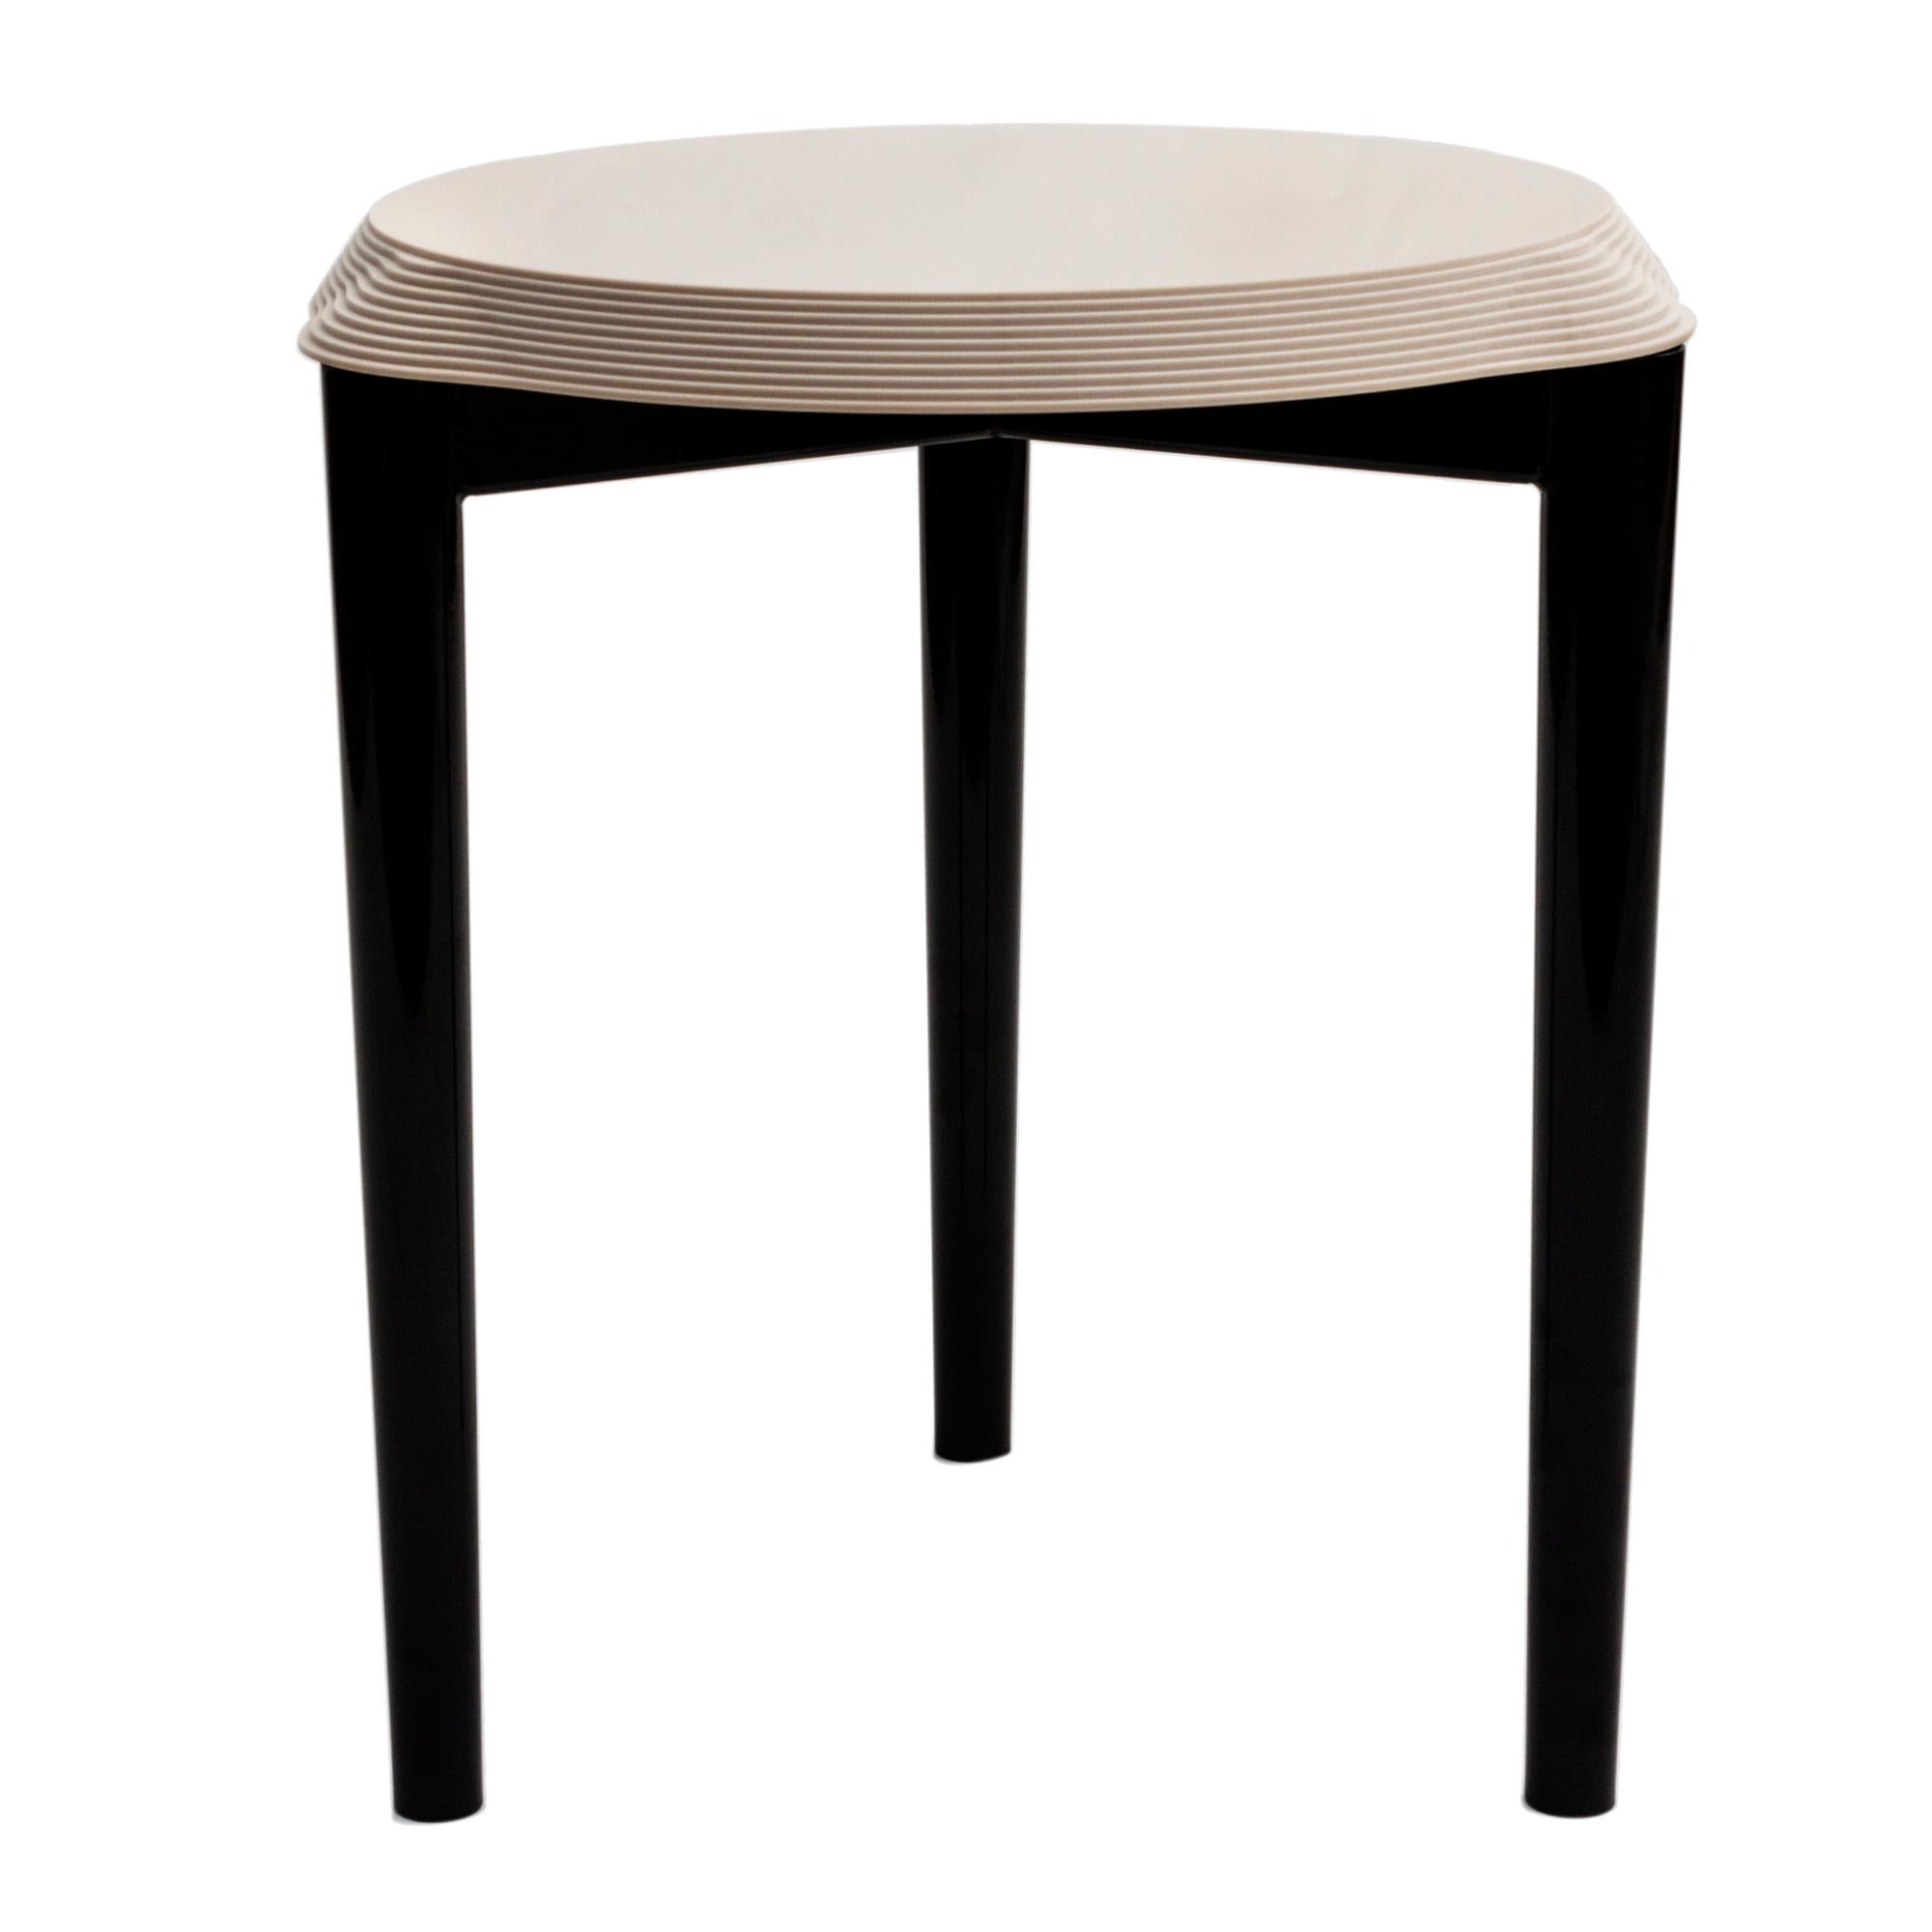 Contemporary Jump Low Stool with Avana Beige Corian Top For Sale